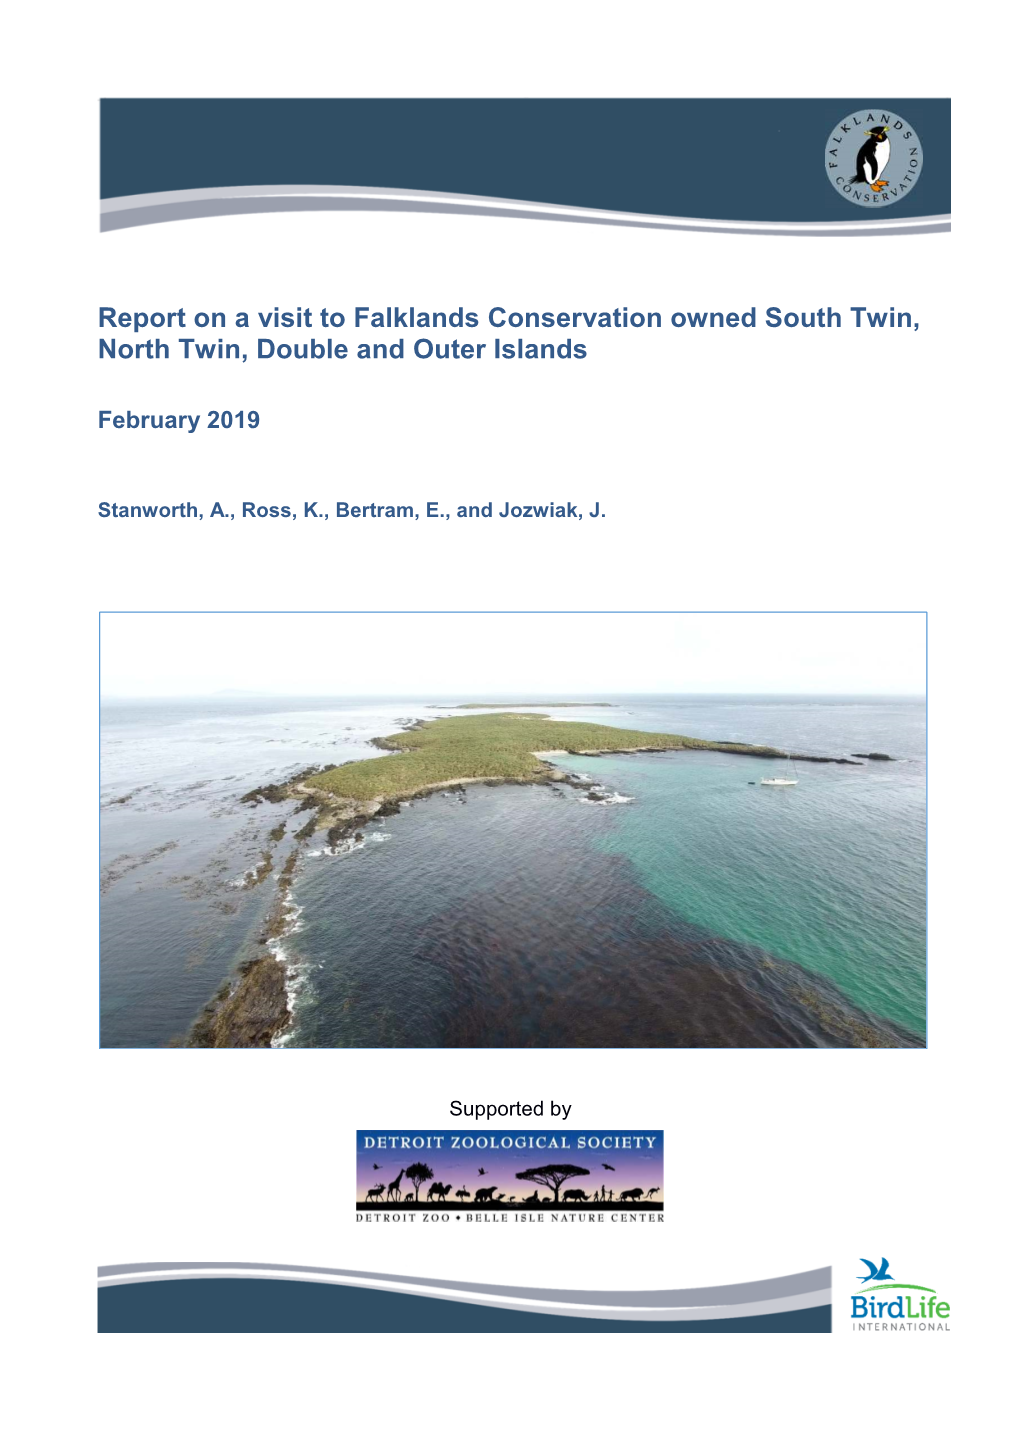 Report on a Visit to Falklands Conservation Owned South Twin, North Twin, Double and Outer Islands